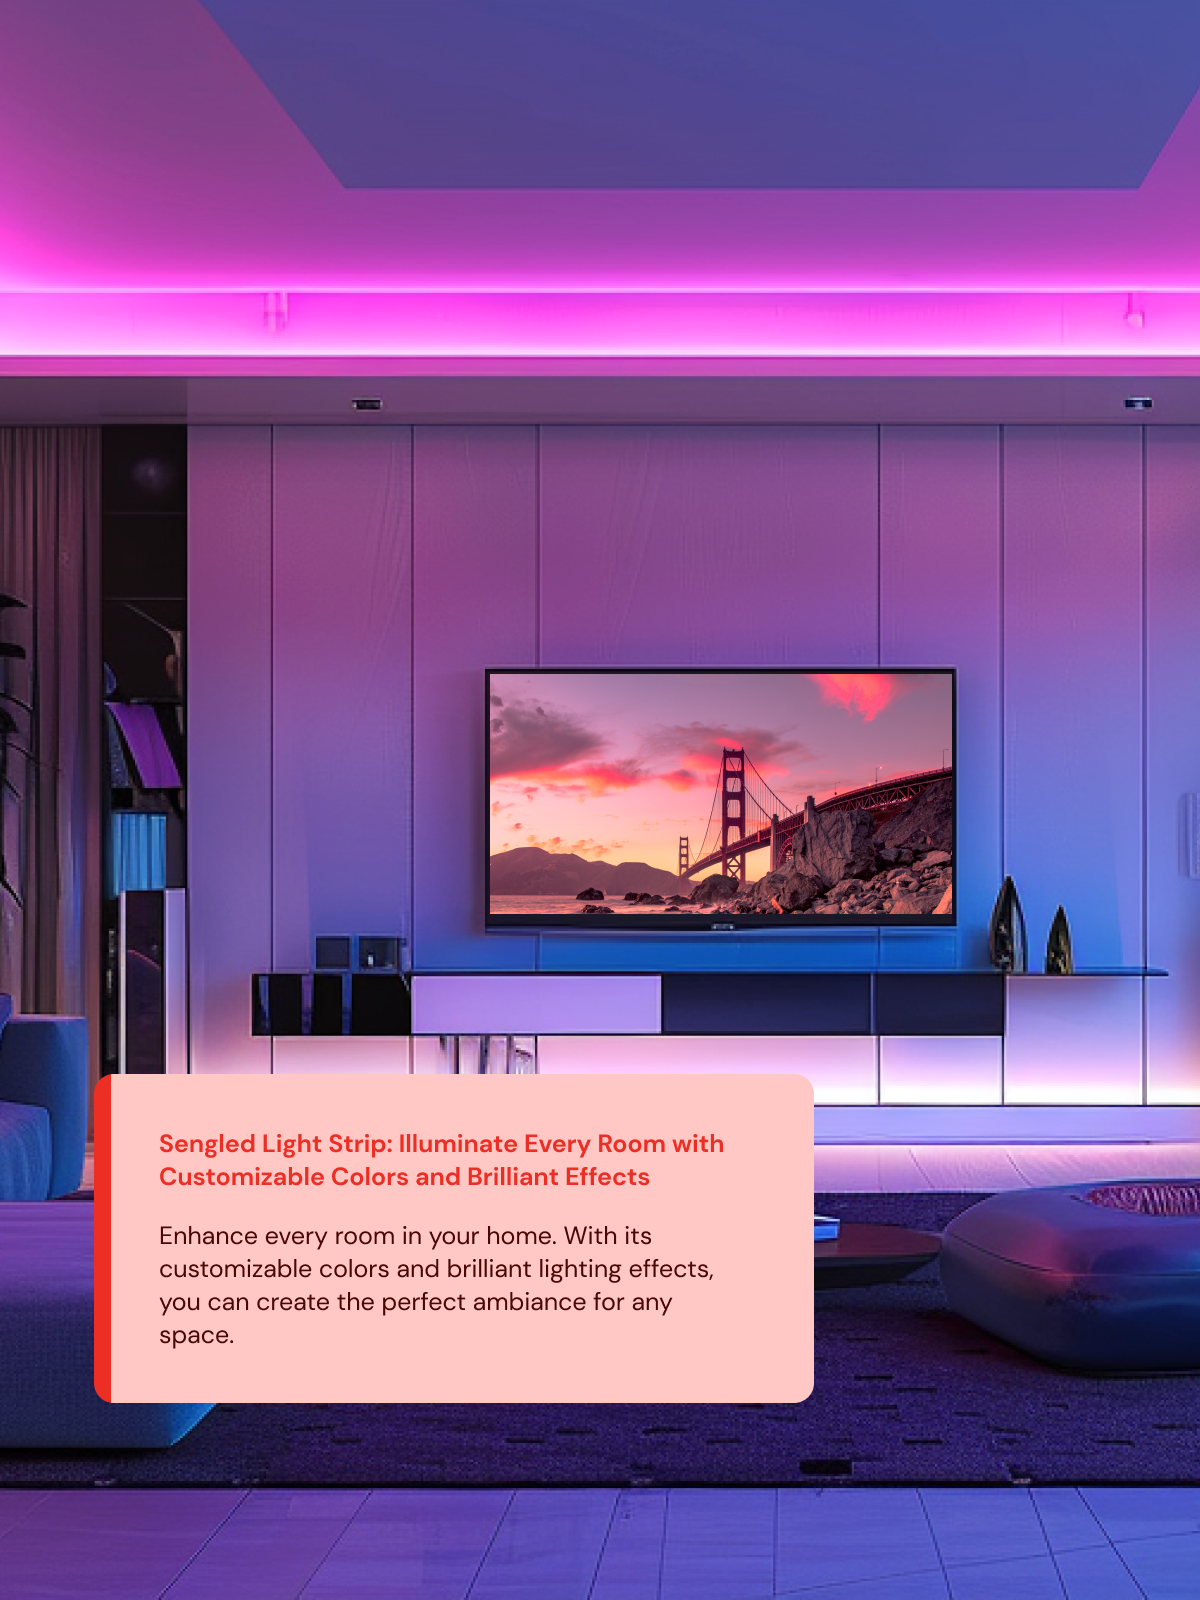 Sengled Light Strip: Illuminate Every Room with Customizable Colors and Brilliant Effects